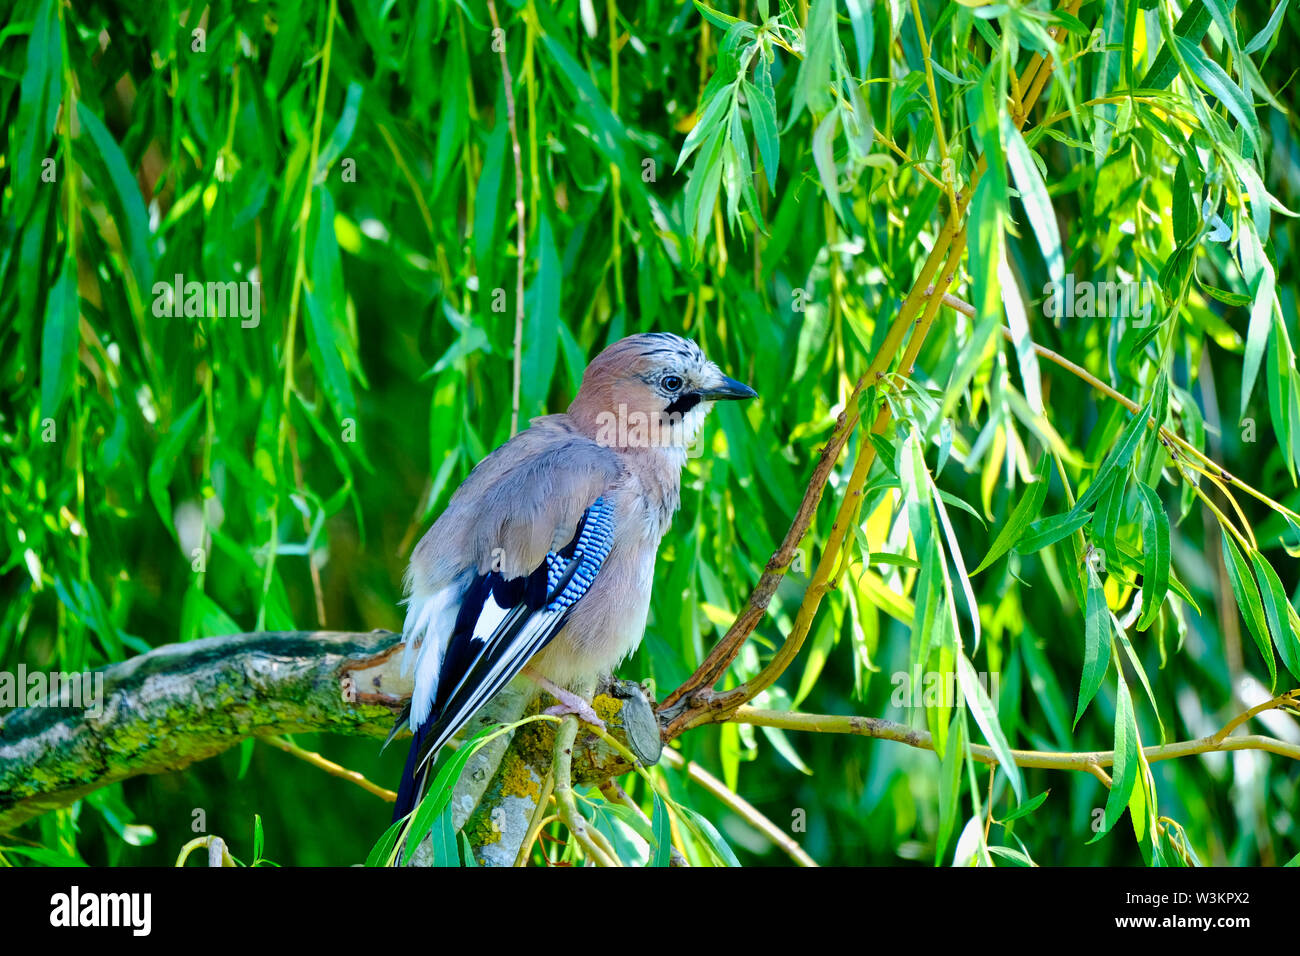 West Sussex, England, UK. Single Eurasian Jay (Garrulus glandarius) perched on the branch of a Weeping Willow (Salix babylonica) Stock Photo